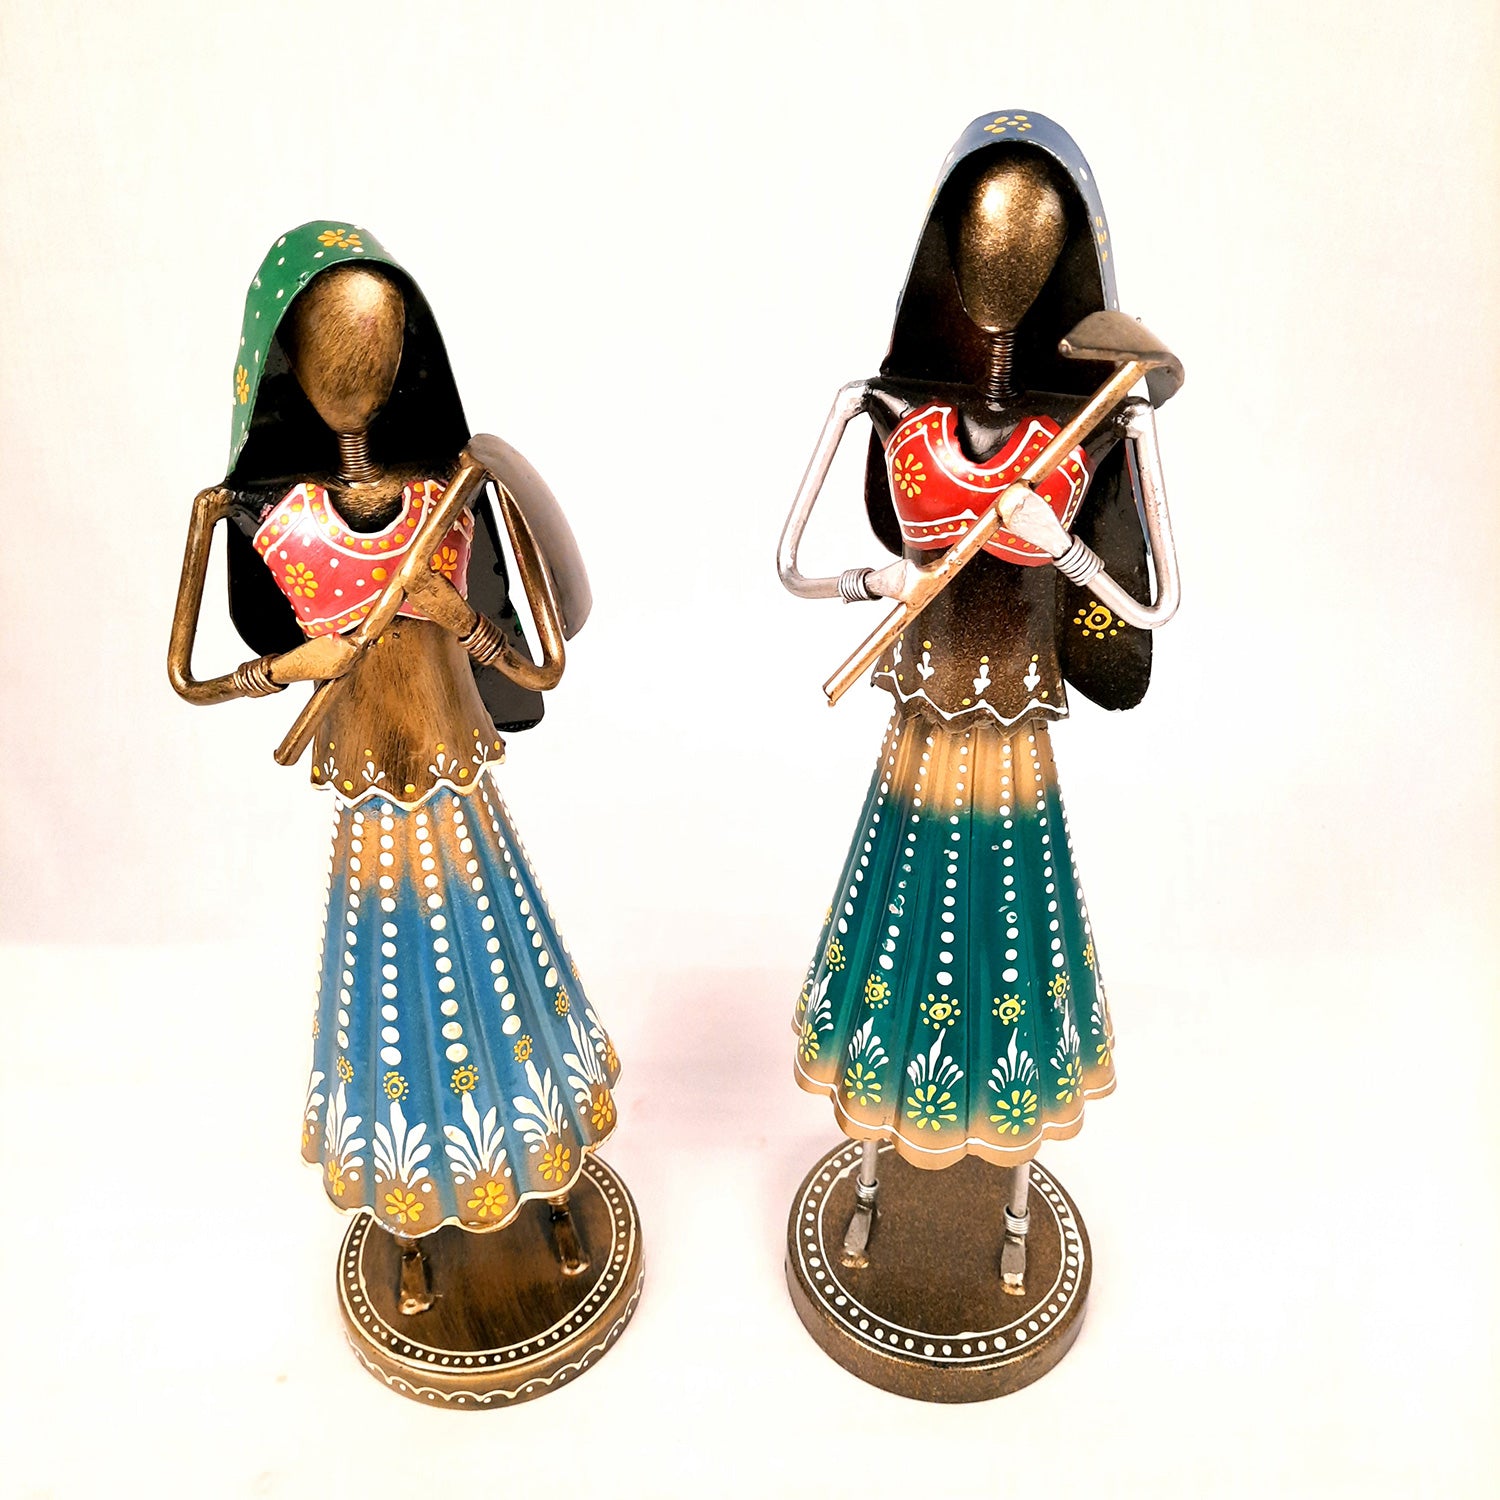 Showpiece Village Worker Ladies | Artifacts for Home, Table, Living Room, TV Unit & Bedroom Decor | Decorative Show piece for Office Desk & Gifts - 15 Inch (Set of 2) - Apkamart